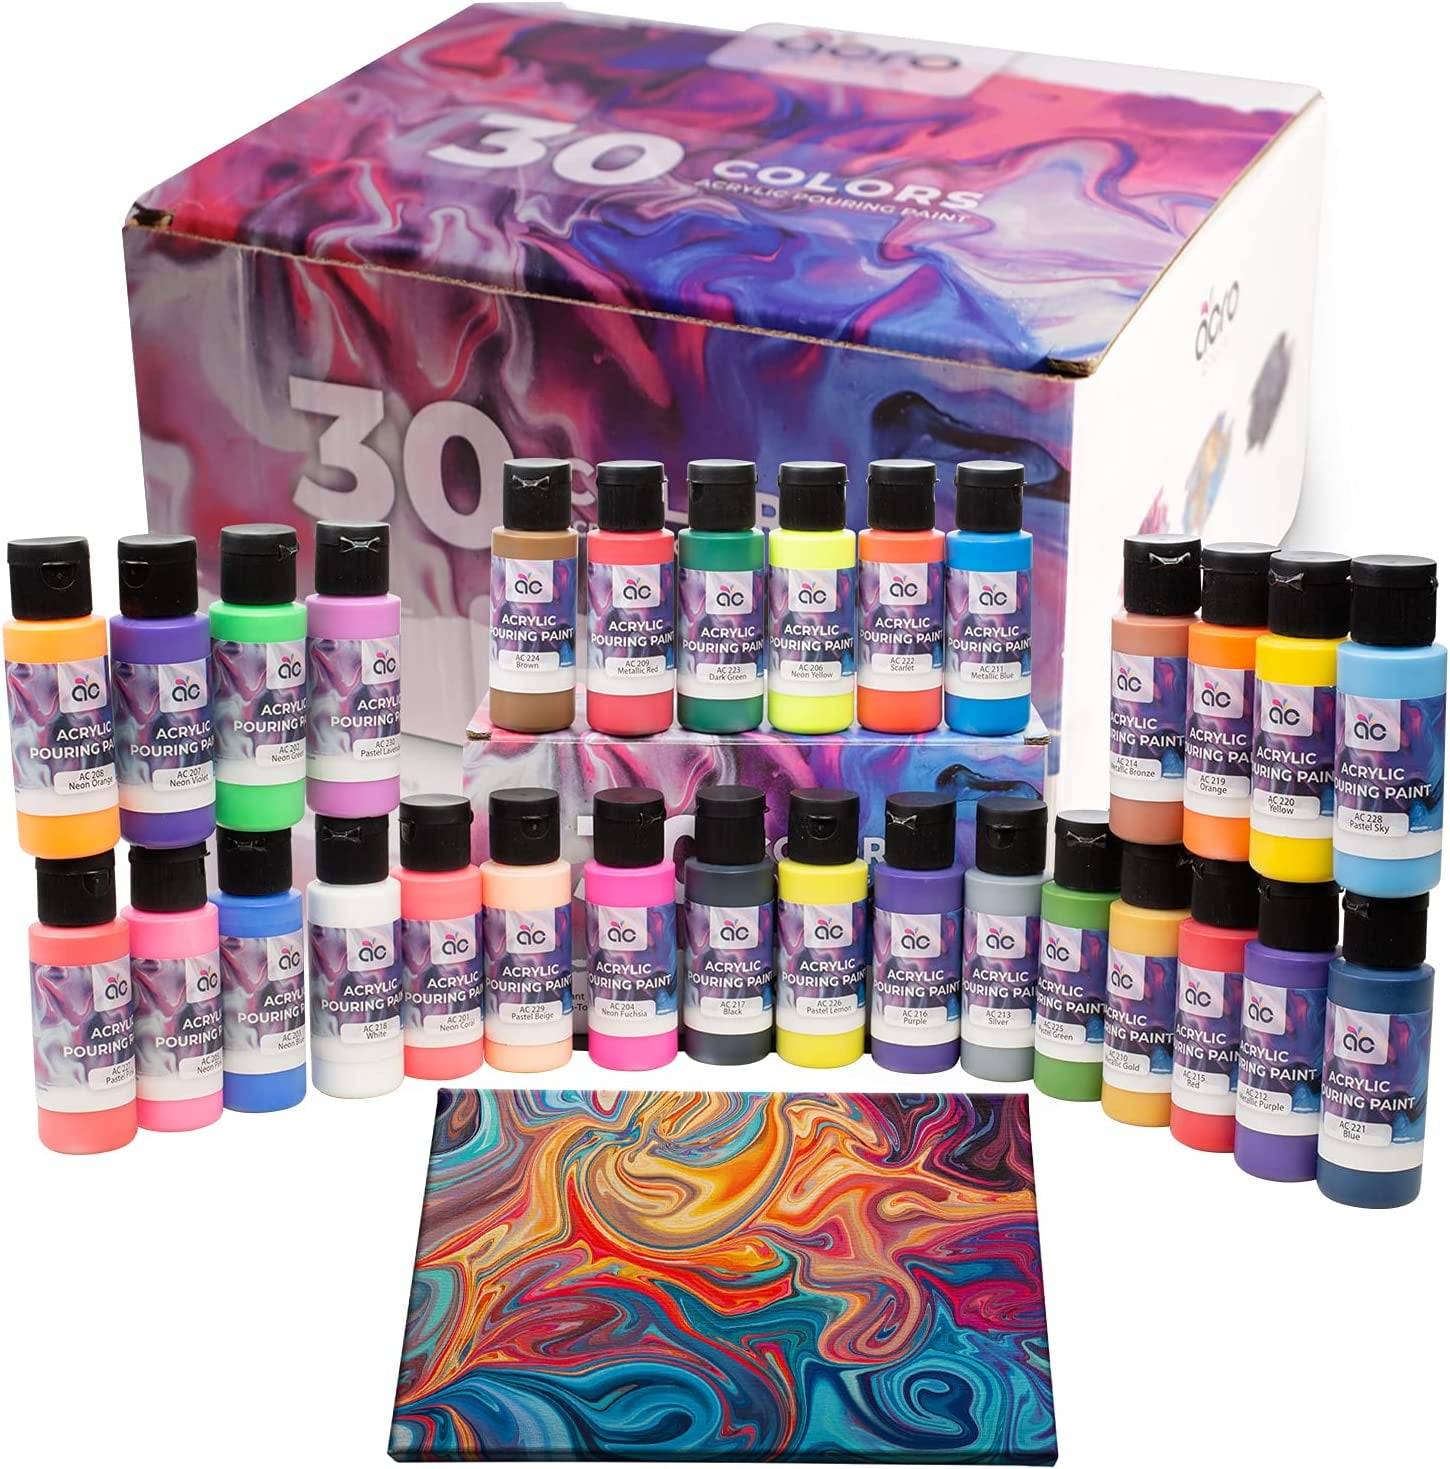 Acrylic Paint Pouring Kits - DIY Art in a Box - Arts and Crafts Ideas